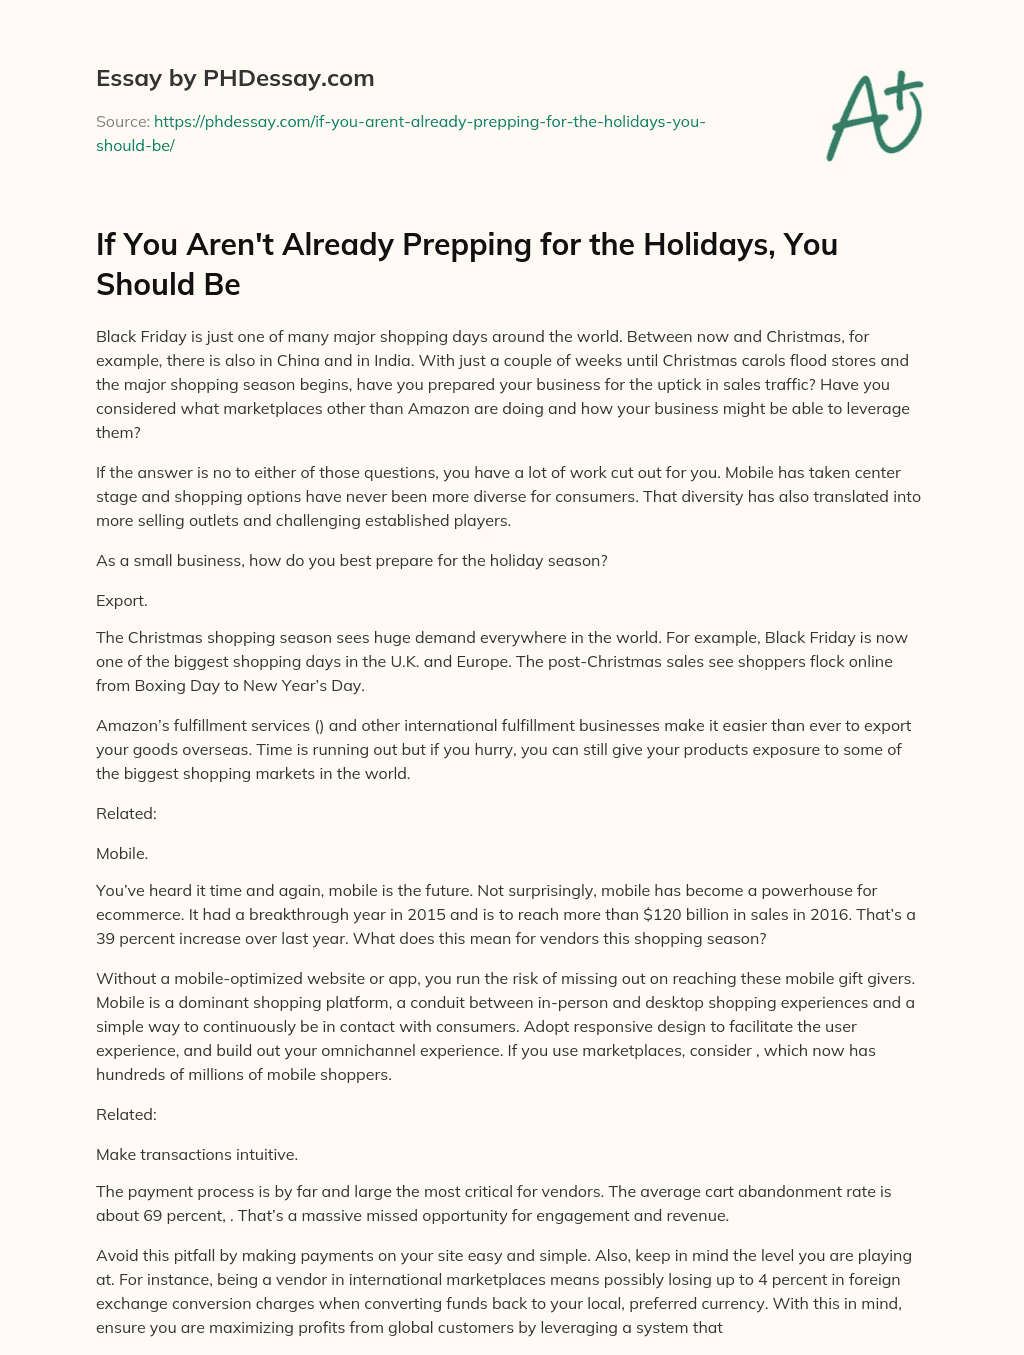 If You Aren’t Already Prepping for the Holidays, You Should Be essay